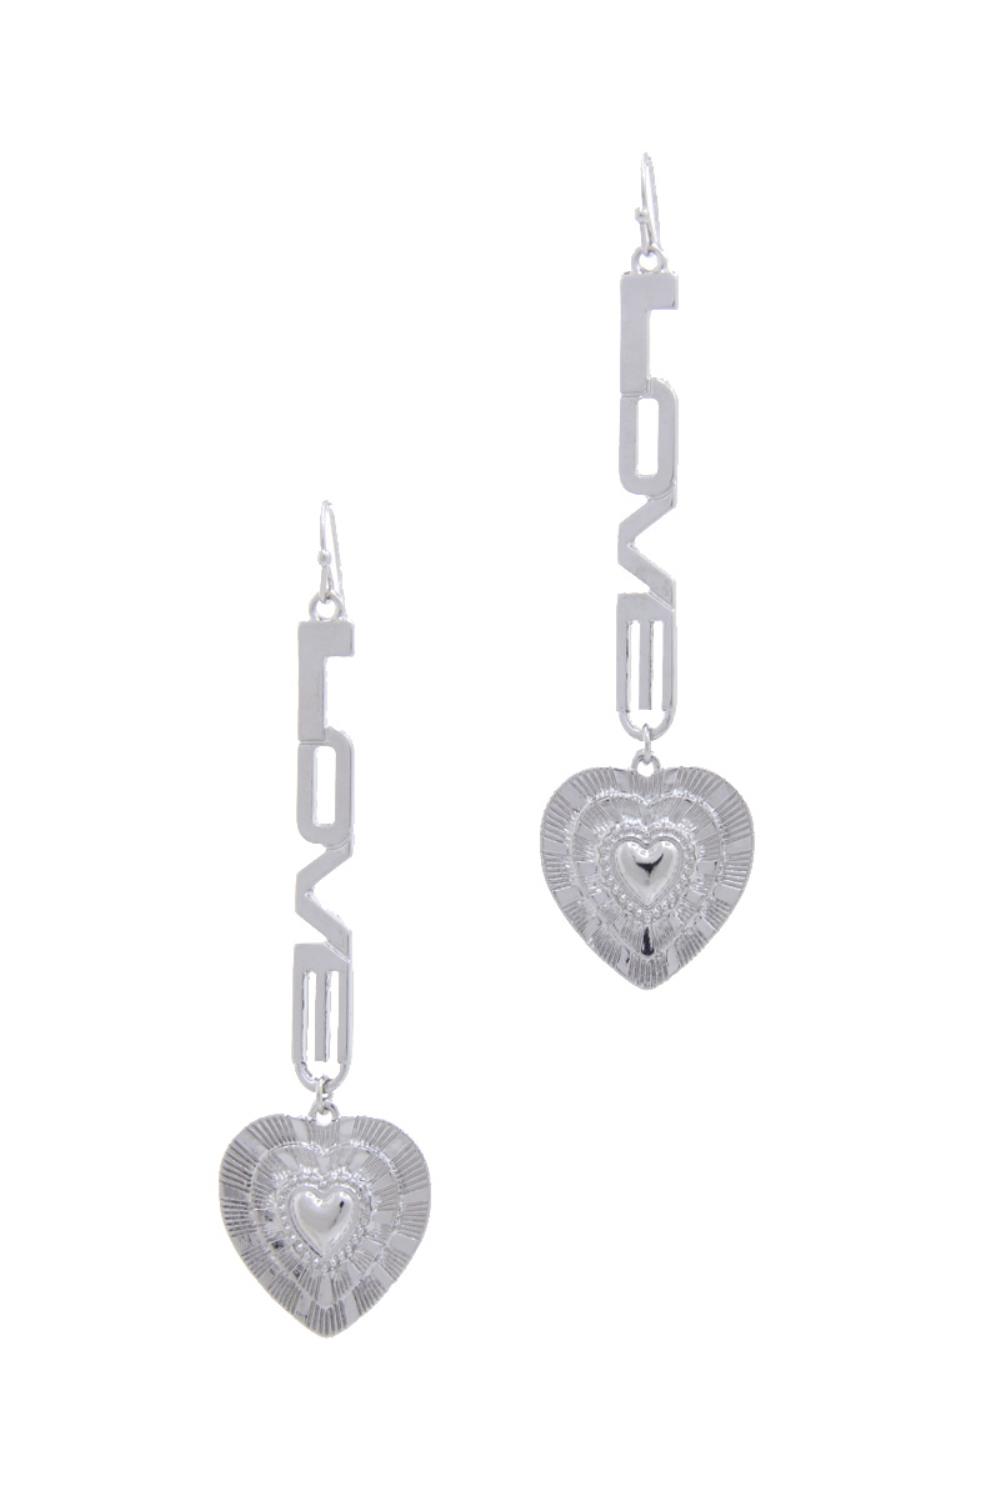 - Love Heart Dangle Earring - Ships from The US - earrings at TFC&H Co.